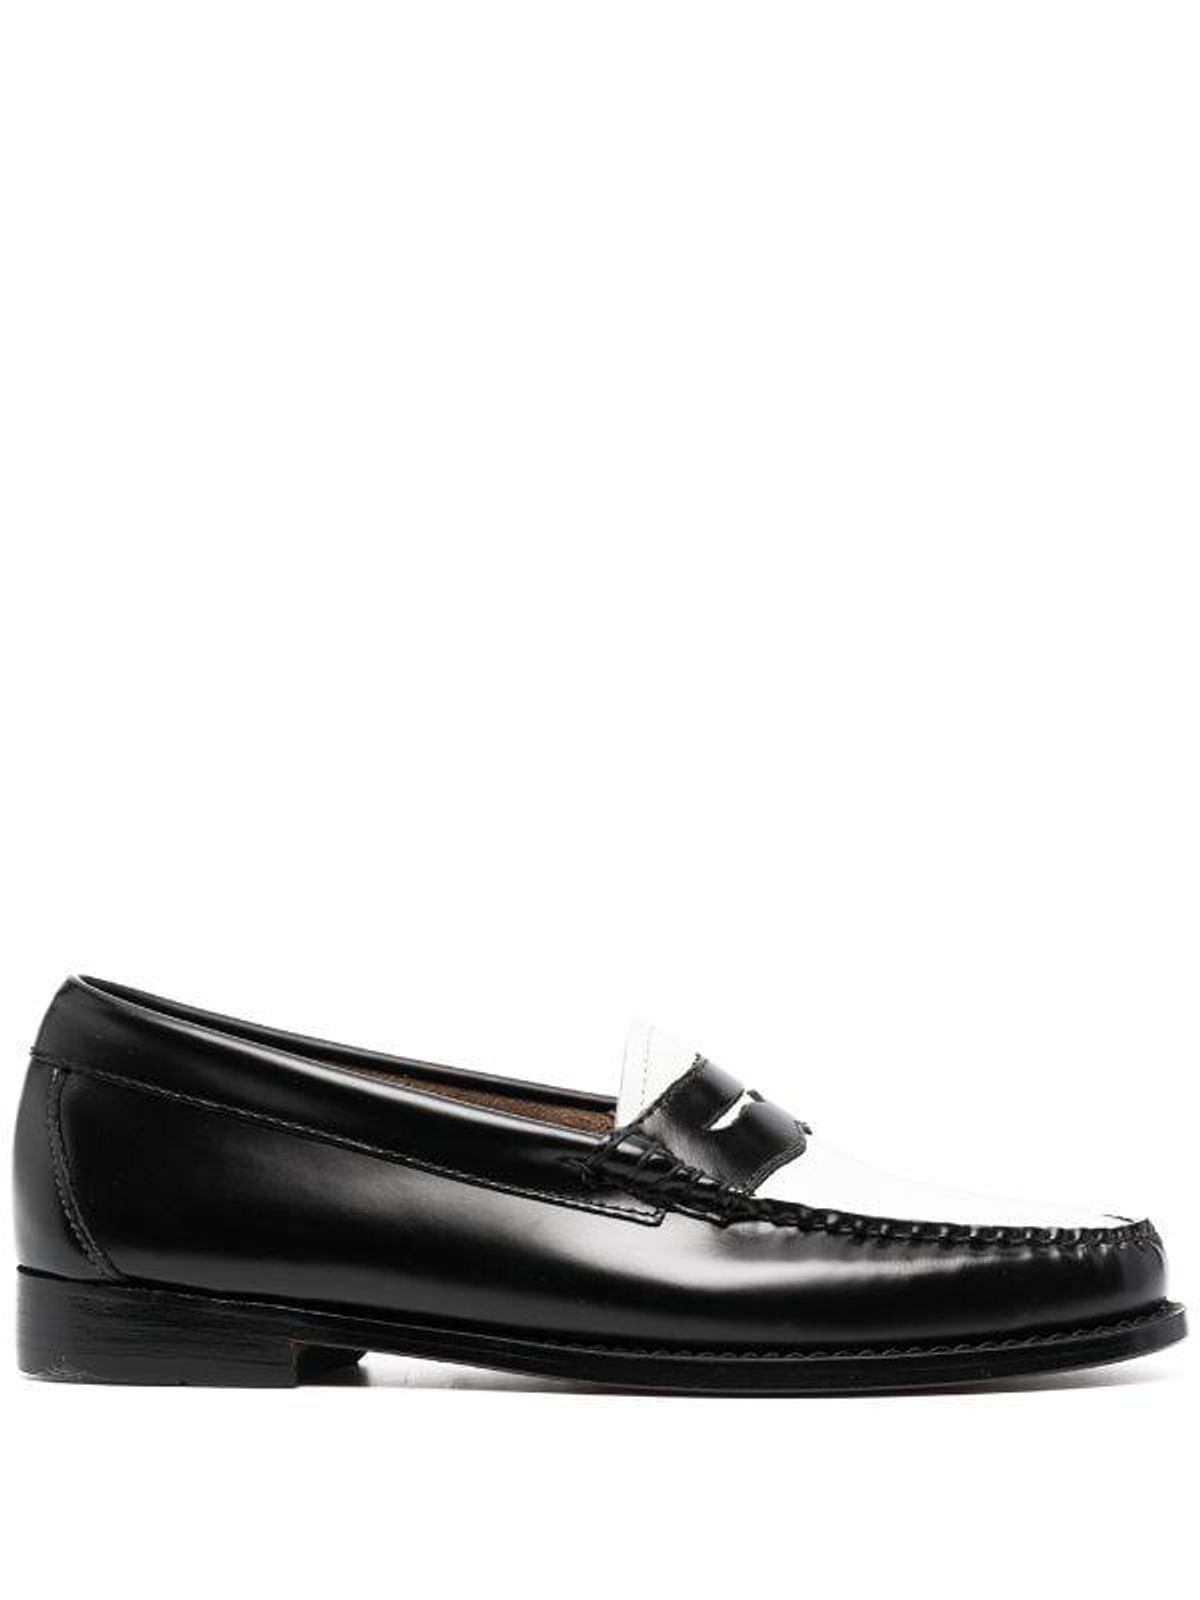 gh bass and co colour block penny loafers